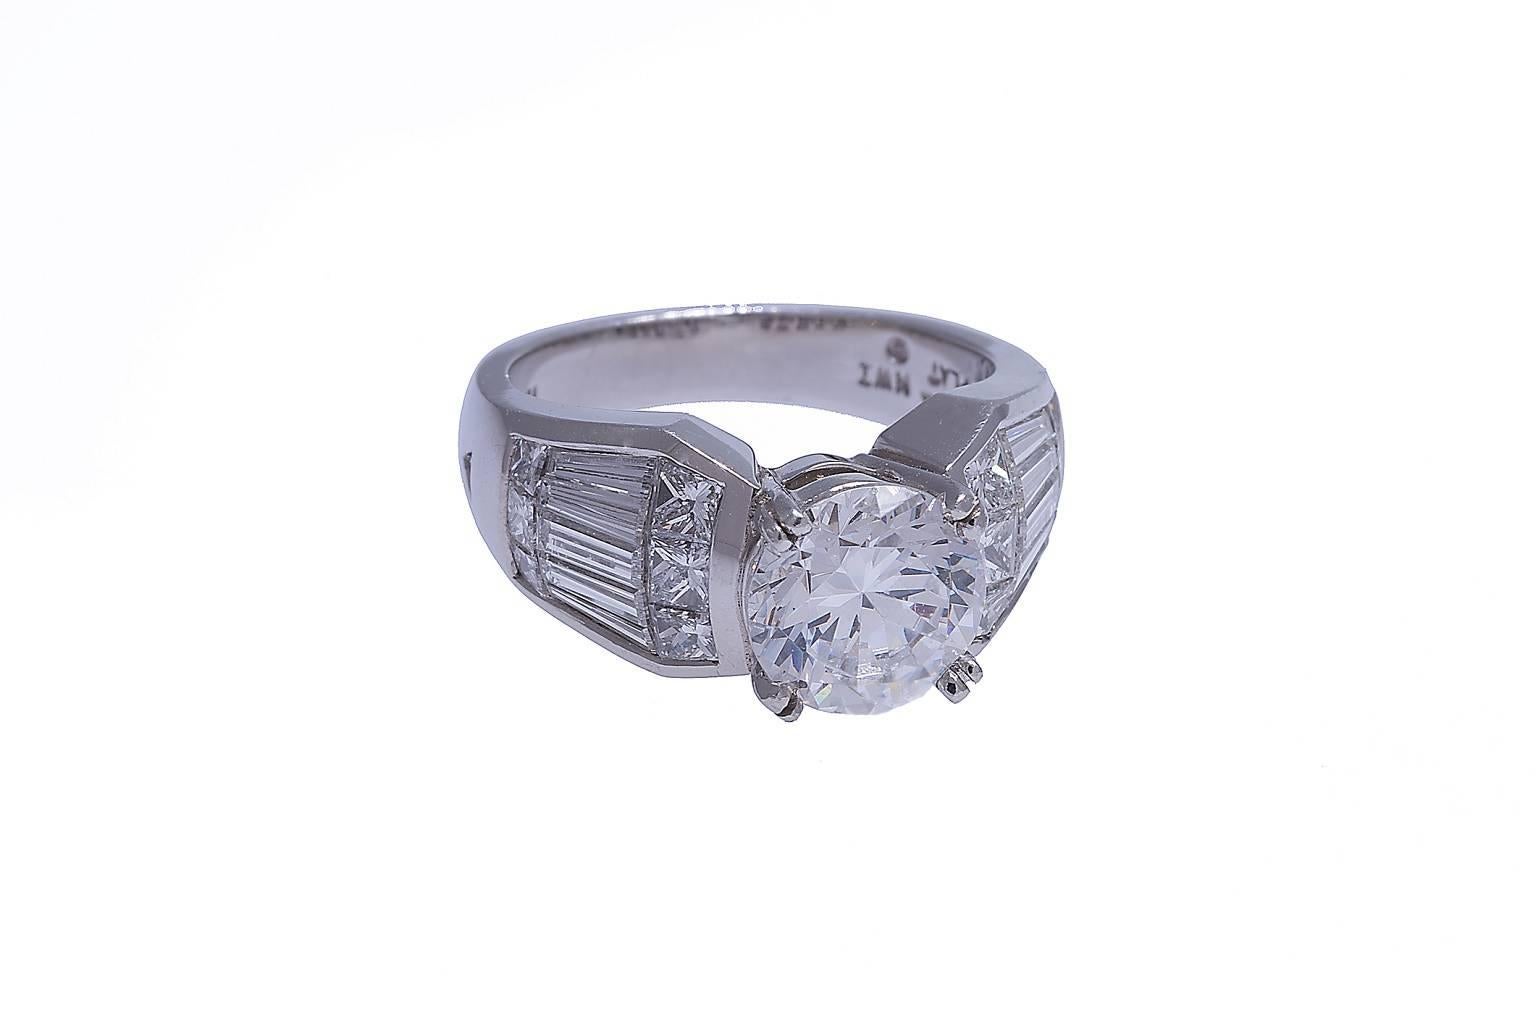 Platinum Nova ring with GIA certified 1.74 carats round brilliant cut diamond, H color, SI1 clarity.
The Nova mounting contains contains 23 diamonds, princess cut and baguettes, weighing combined 1.59 carats.
Mounting can be purchased without center